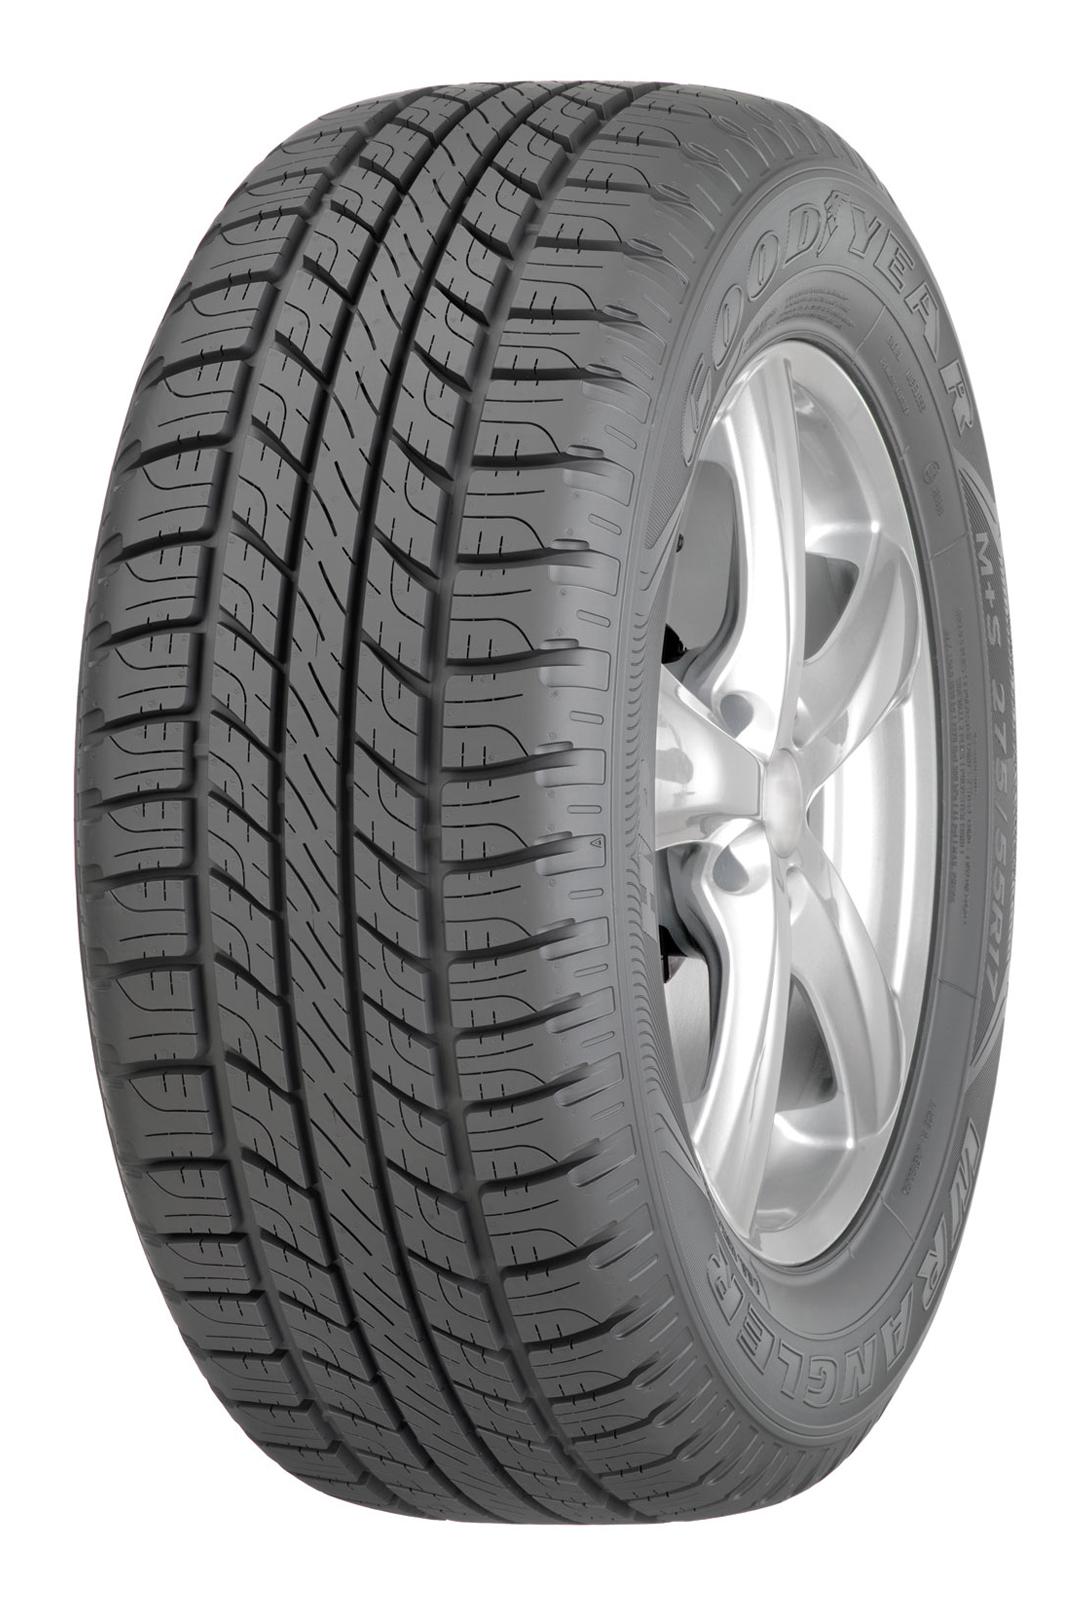 Goodyear WRANGLER HP ALL WEATHER 245/70 R16 WRL HP ALL WEATHER 107H FP M+S